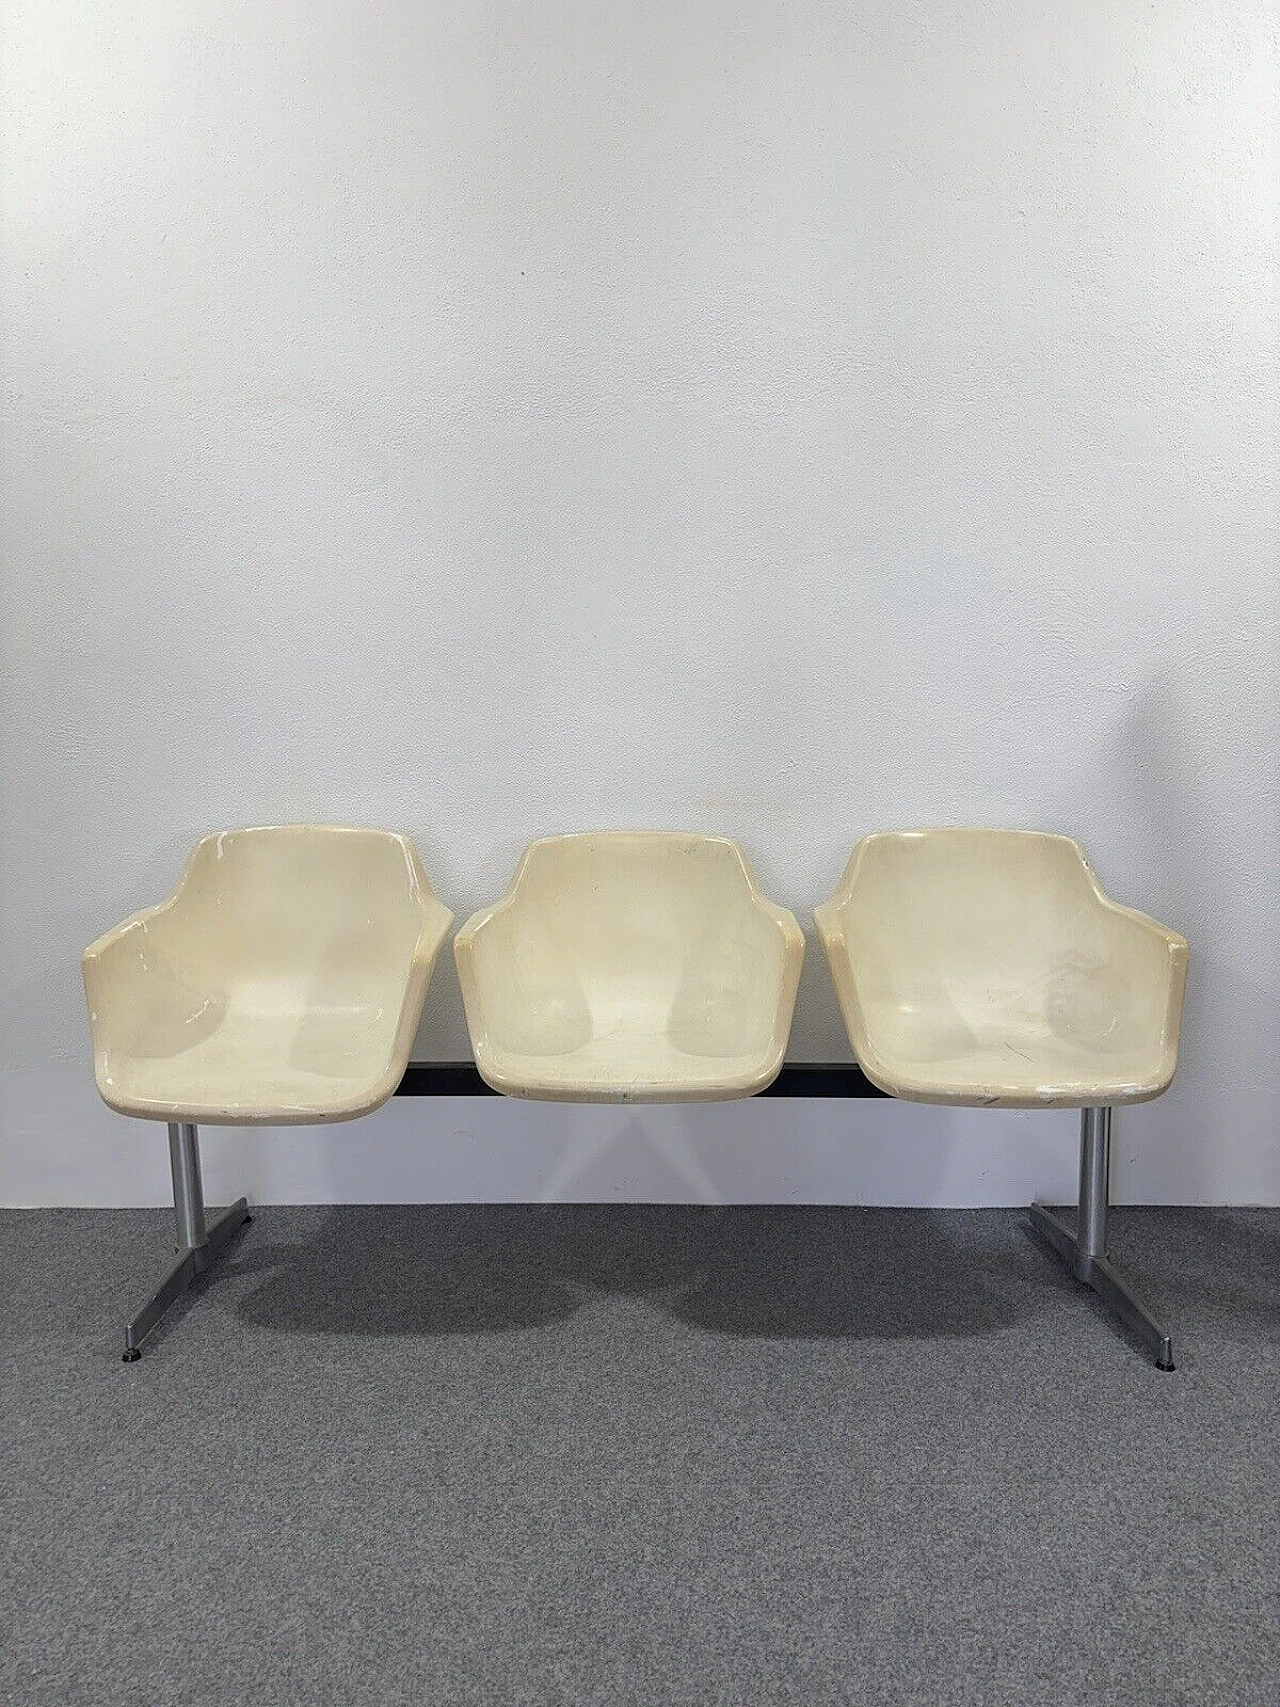 Tandem airport bench by Charles & Ray Eames for Herman Miller 4